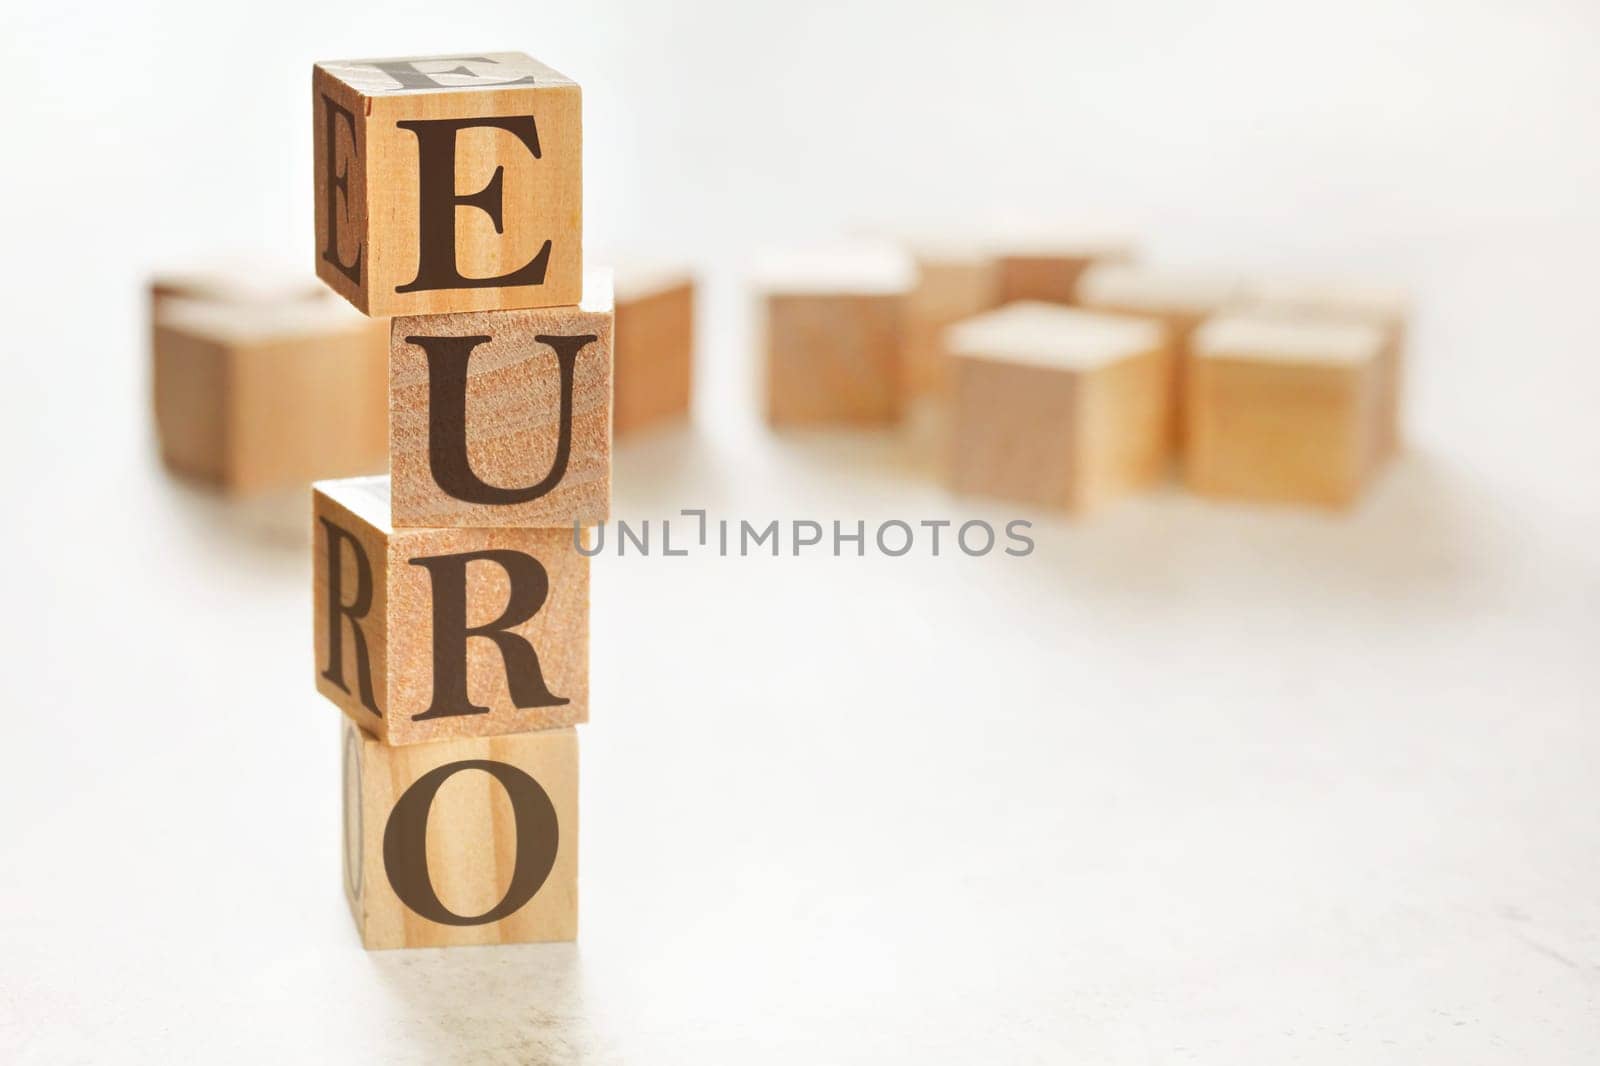 Four wooden cubes arranged in stack with word EURO on them, space for text / image at down right corner by Ivanko